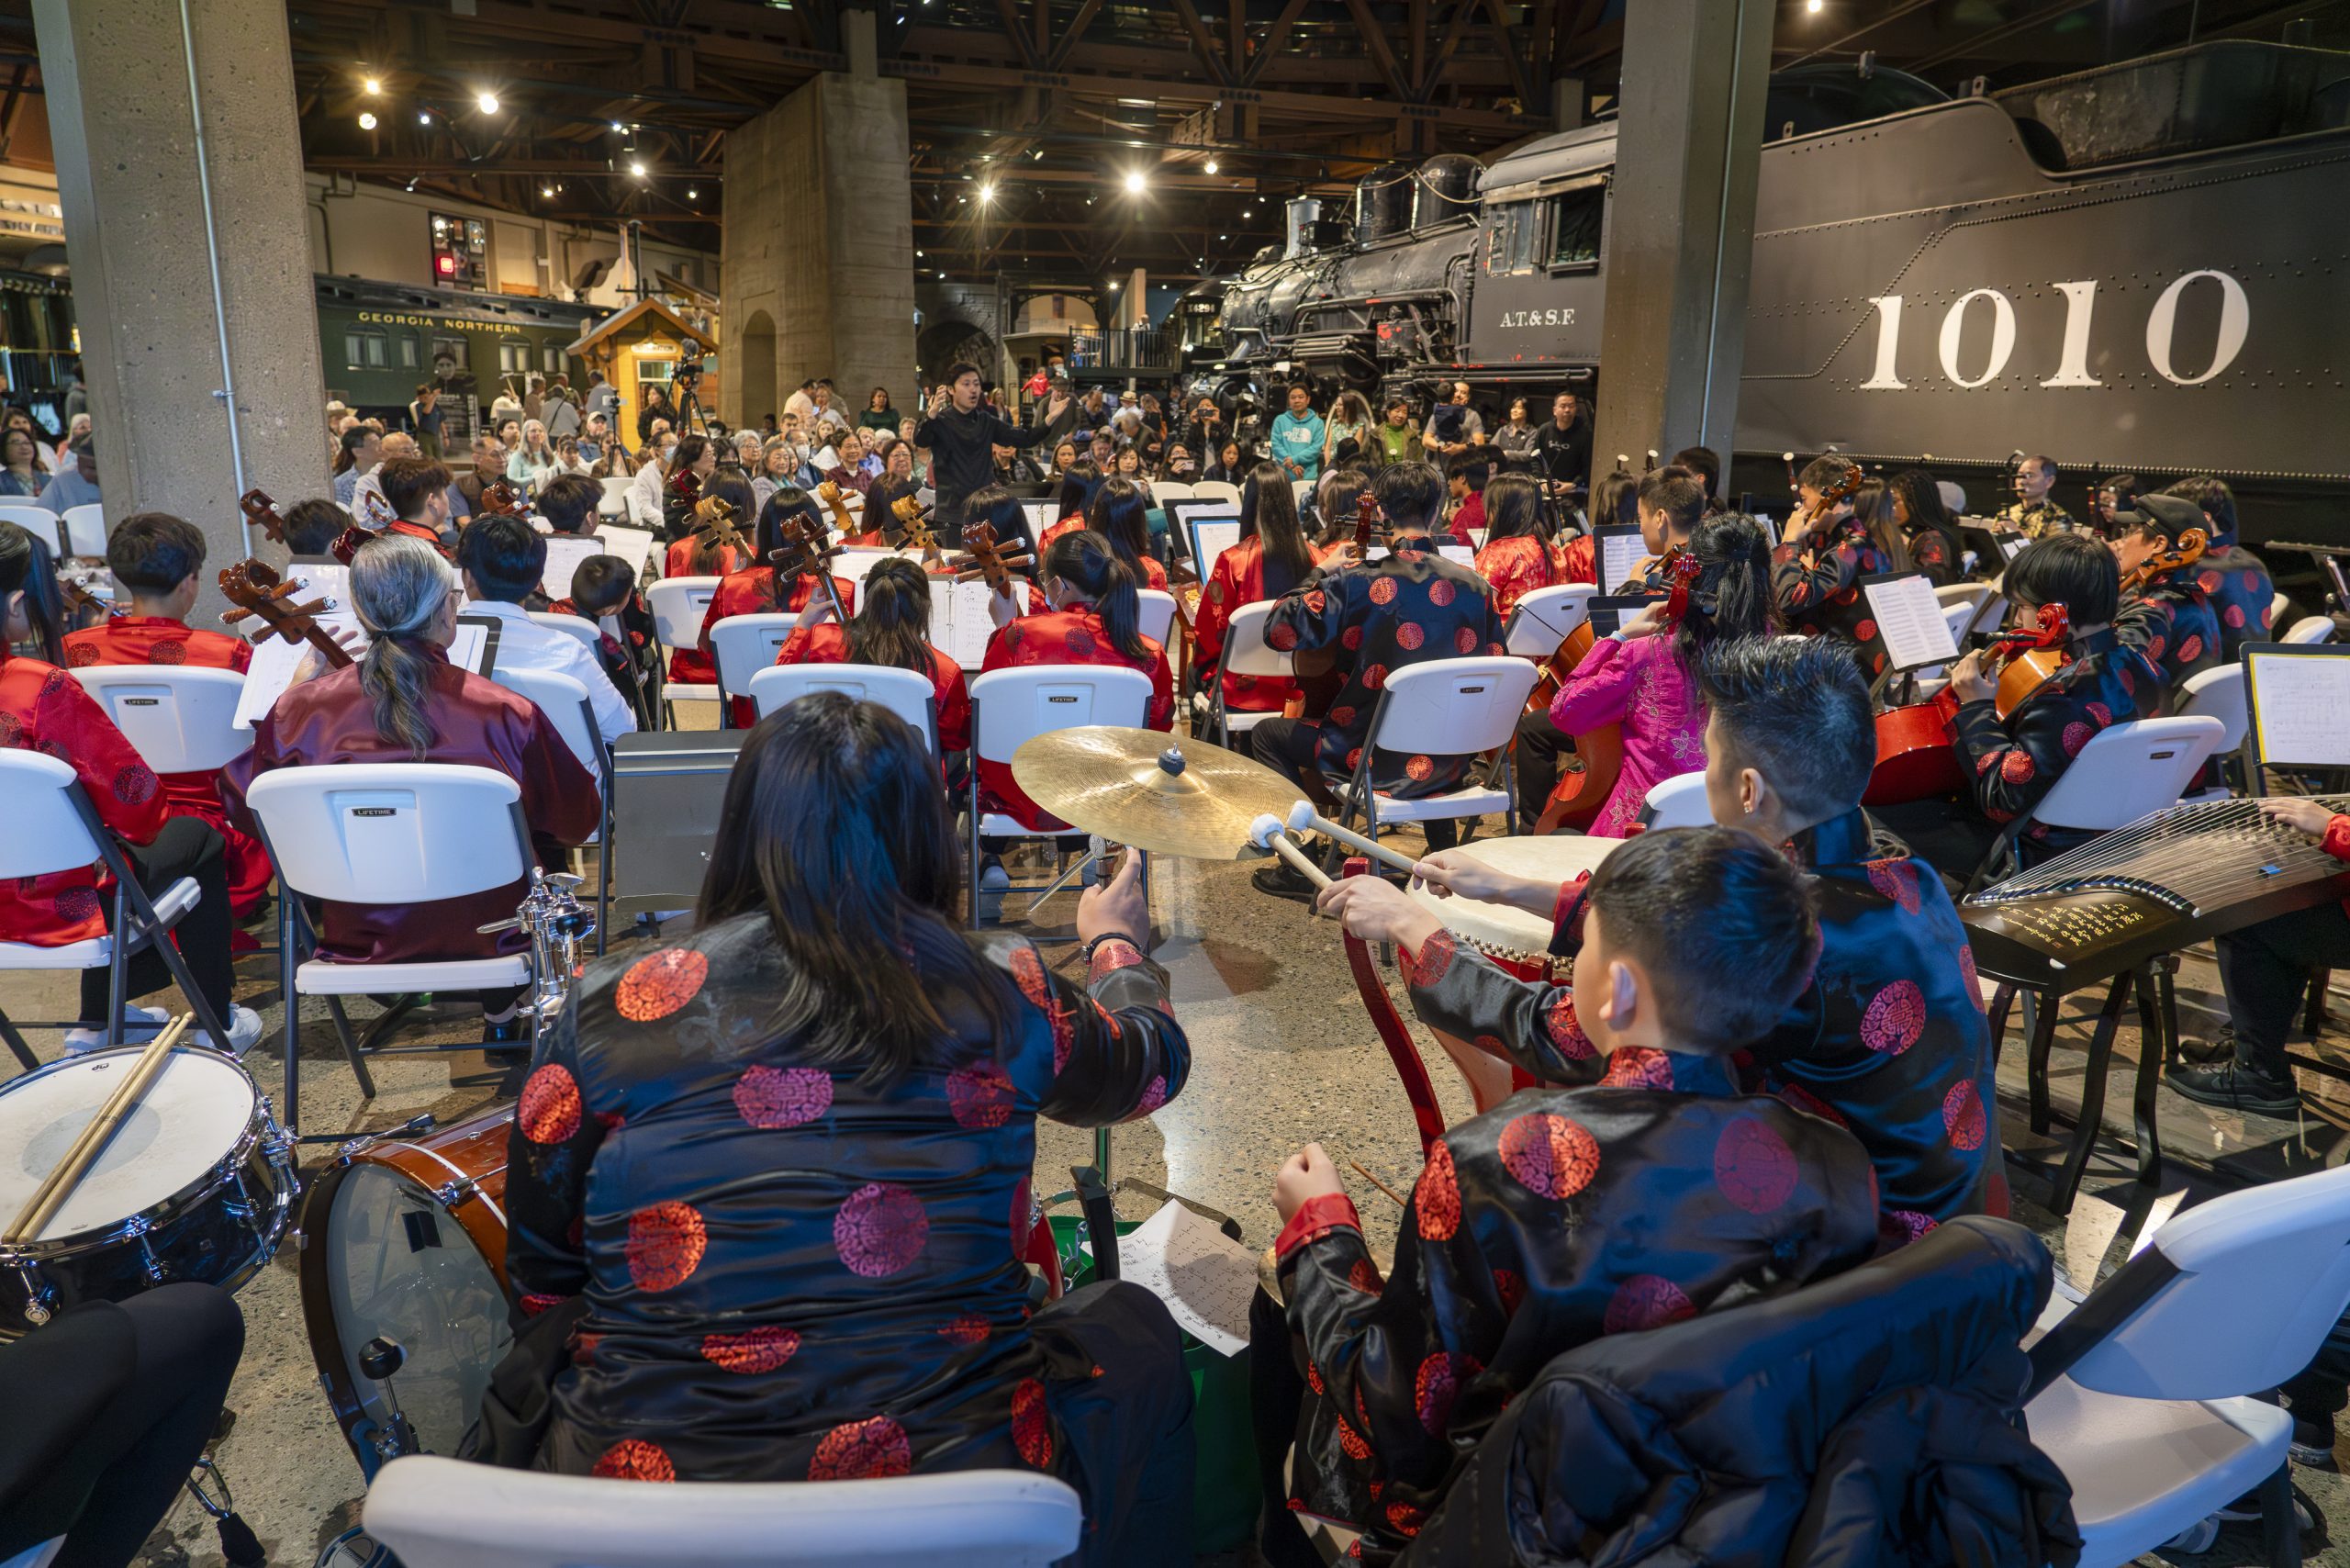 Three youth orchestra members sit with their backs facing the camera, wearing black silk shirts with red flowers. They are grouped around several percussion instruments. In front of them is the rest of the youth orchestra, mostly wearing red silk shirts with black embroidery, with a conductor standing and gesturing. In the background, a seated audience watches. The high-ceilinged museum room is ringed with full-size train cars.